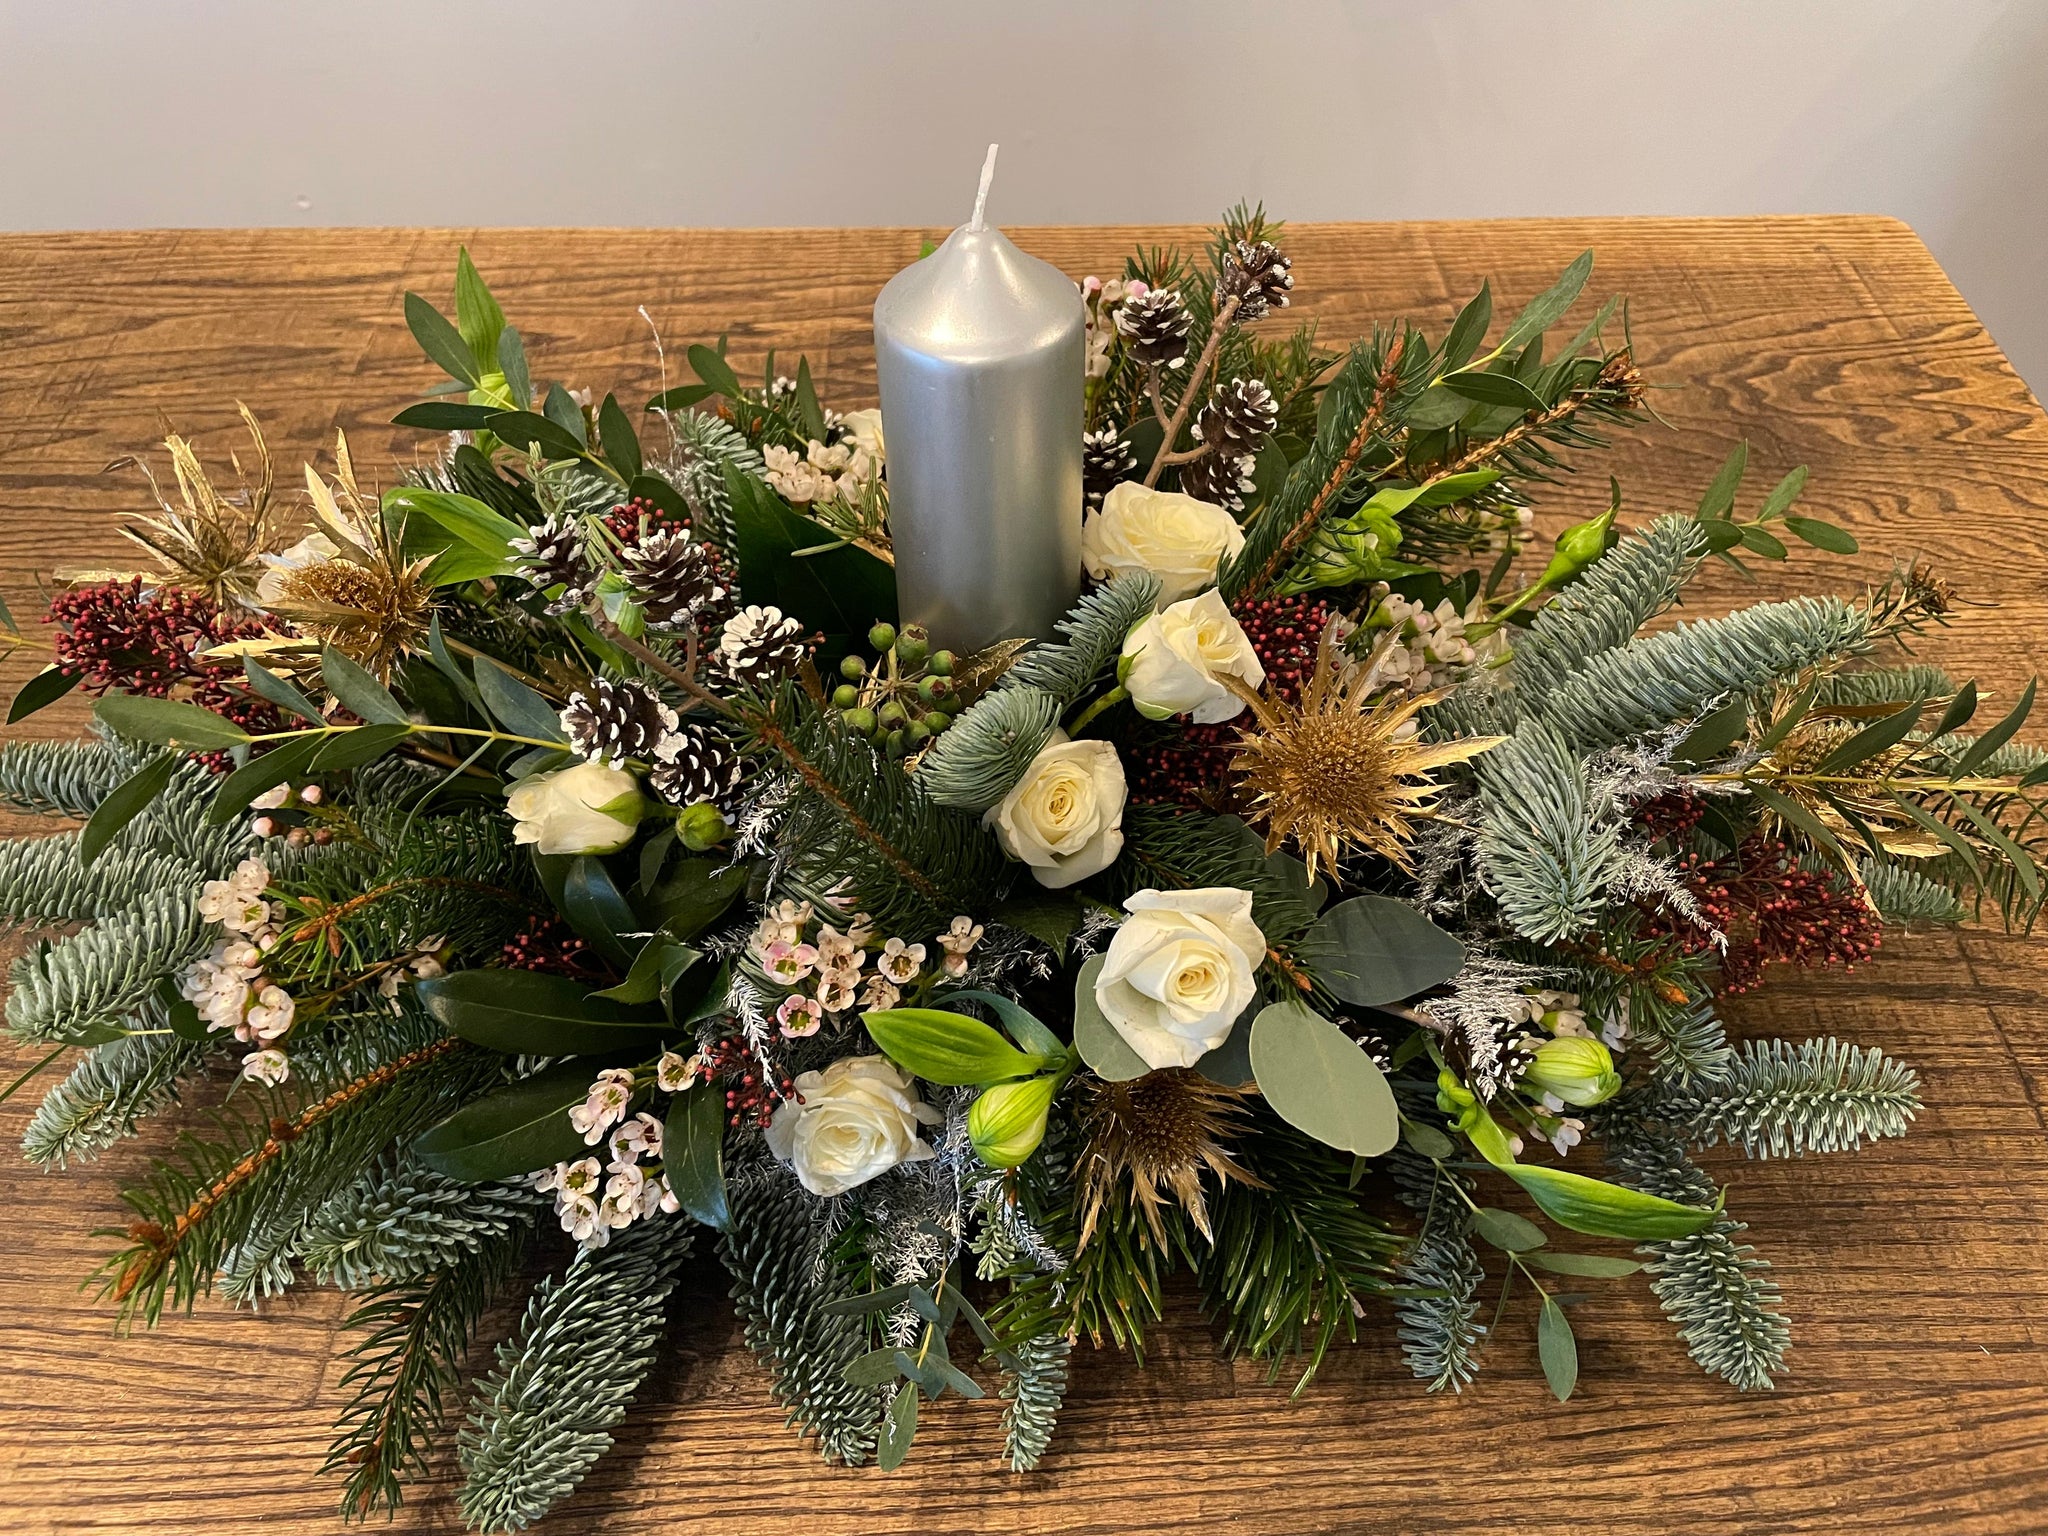 Christmas Table Centerpiece Workshop – Sunday 17th December, Starting @ 11am (£75 per person) 2 hours